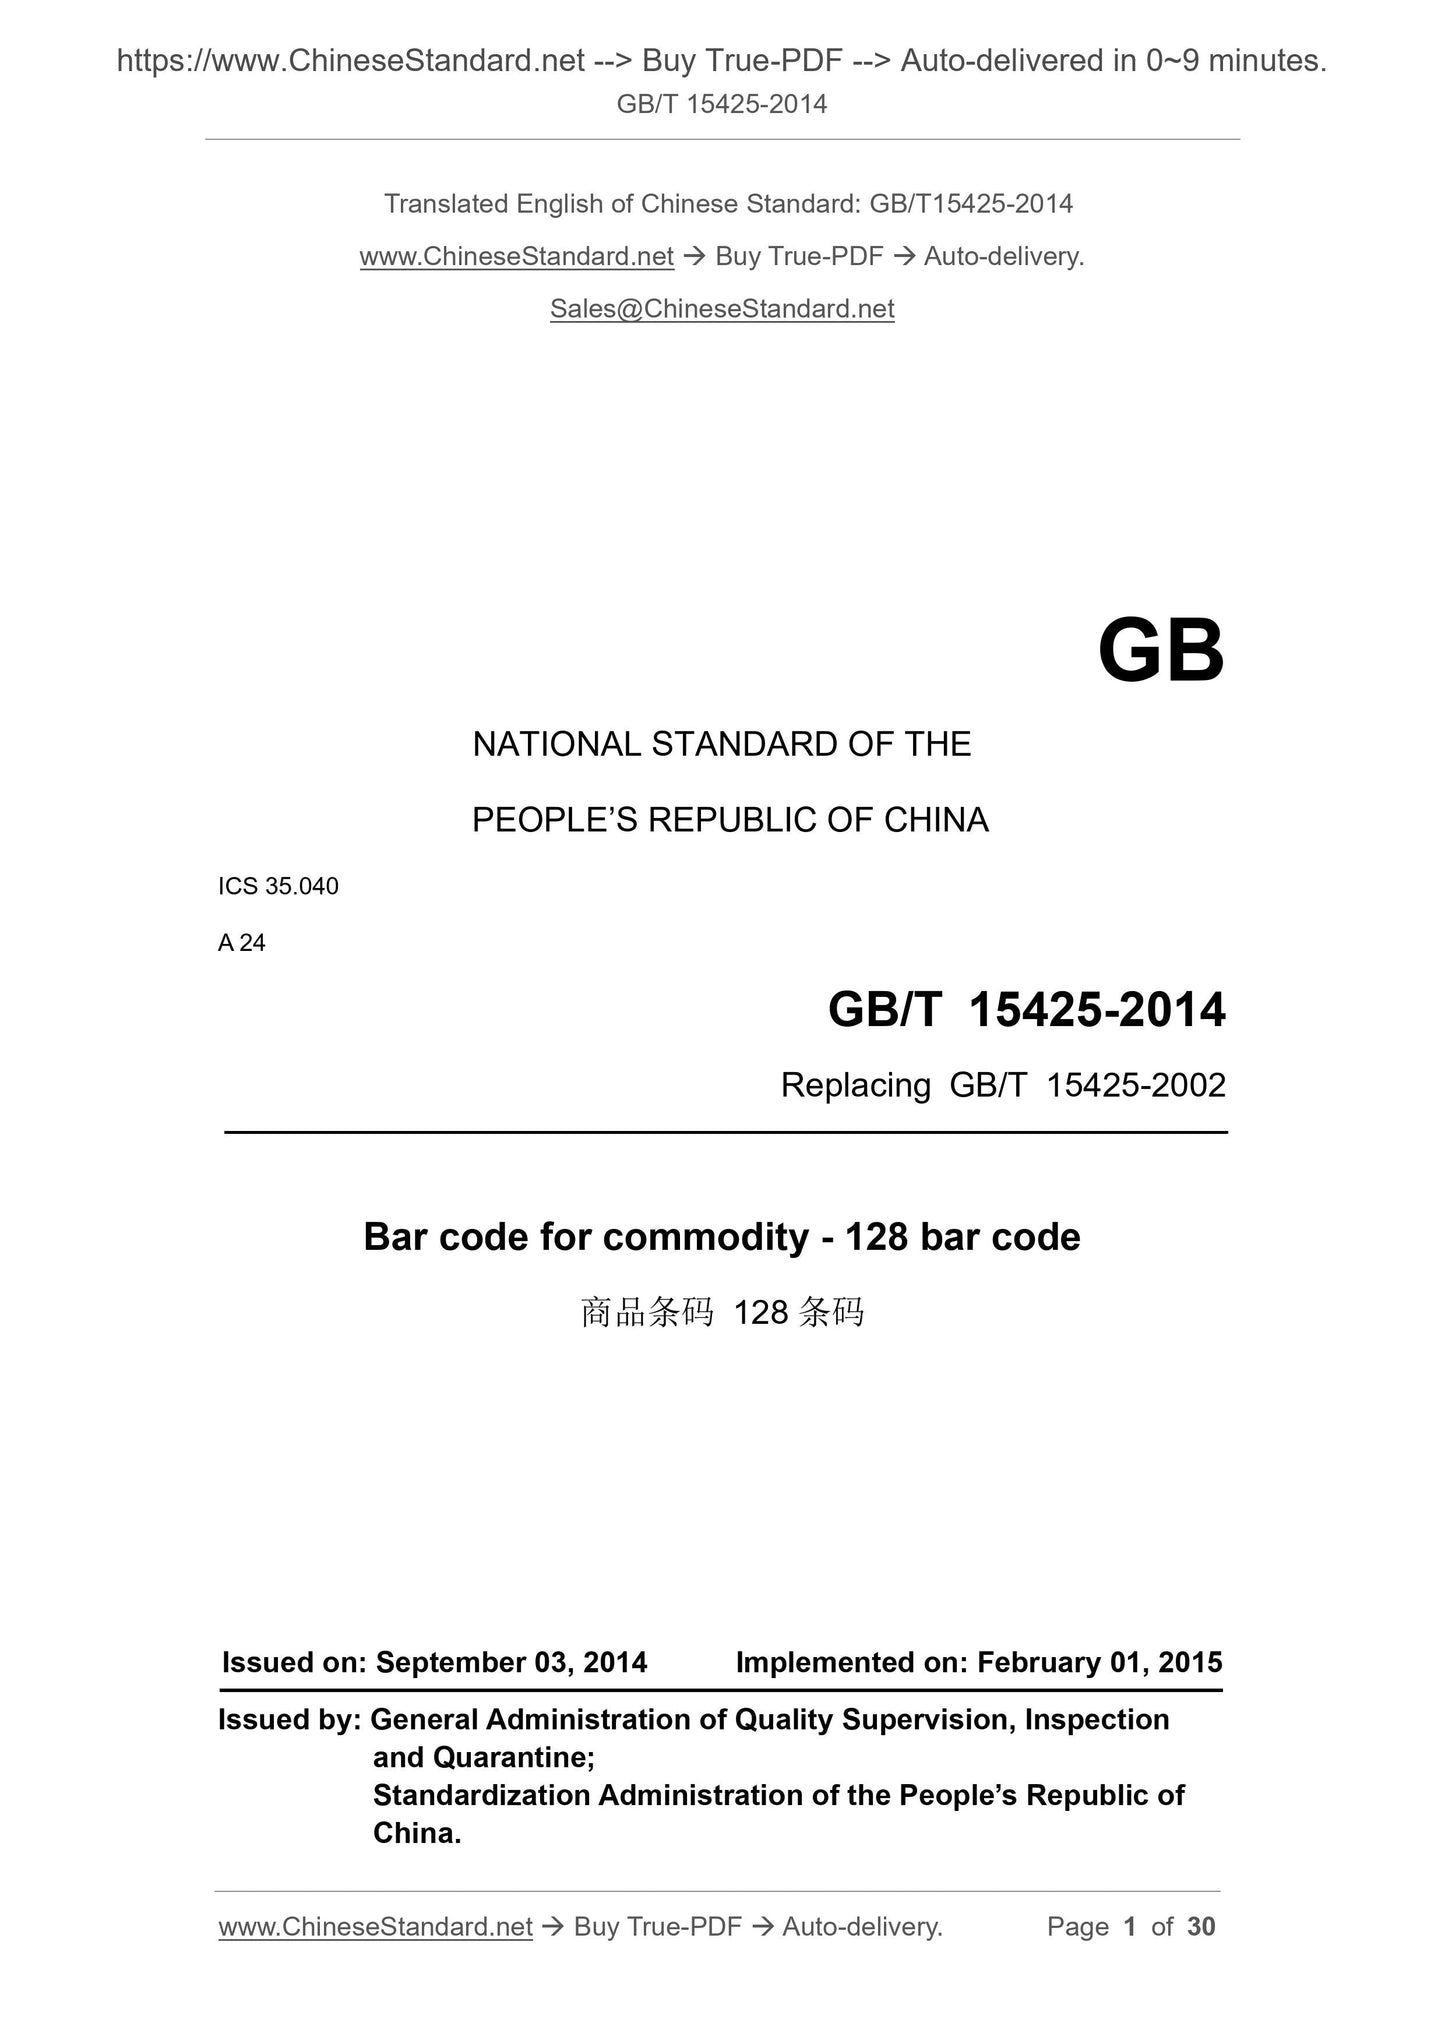 GB/T 15425-2014 Page 1